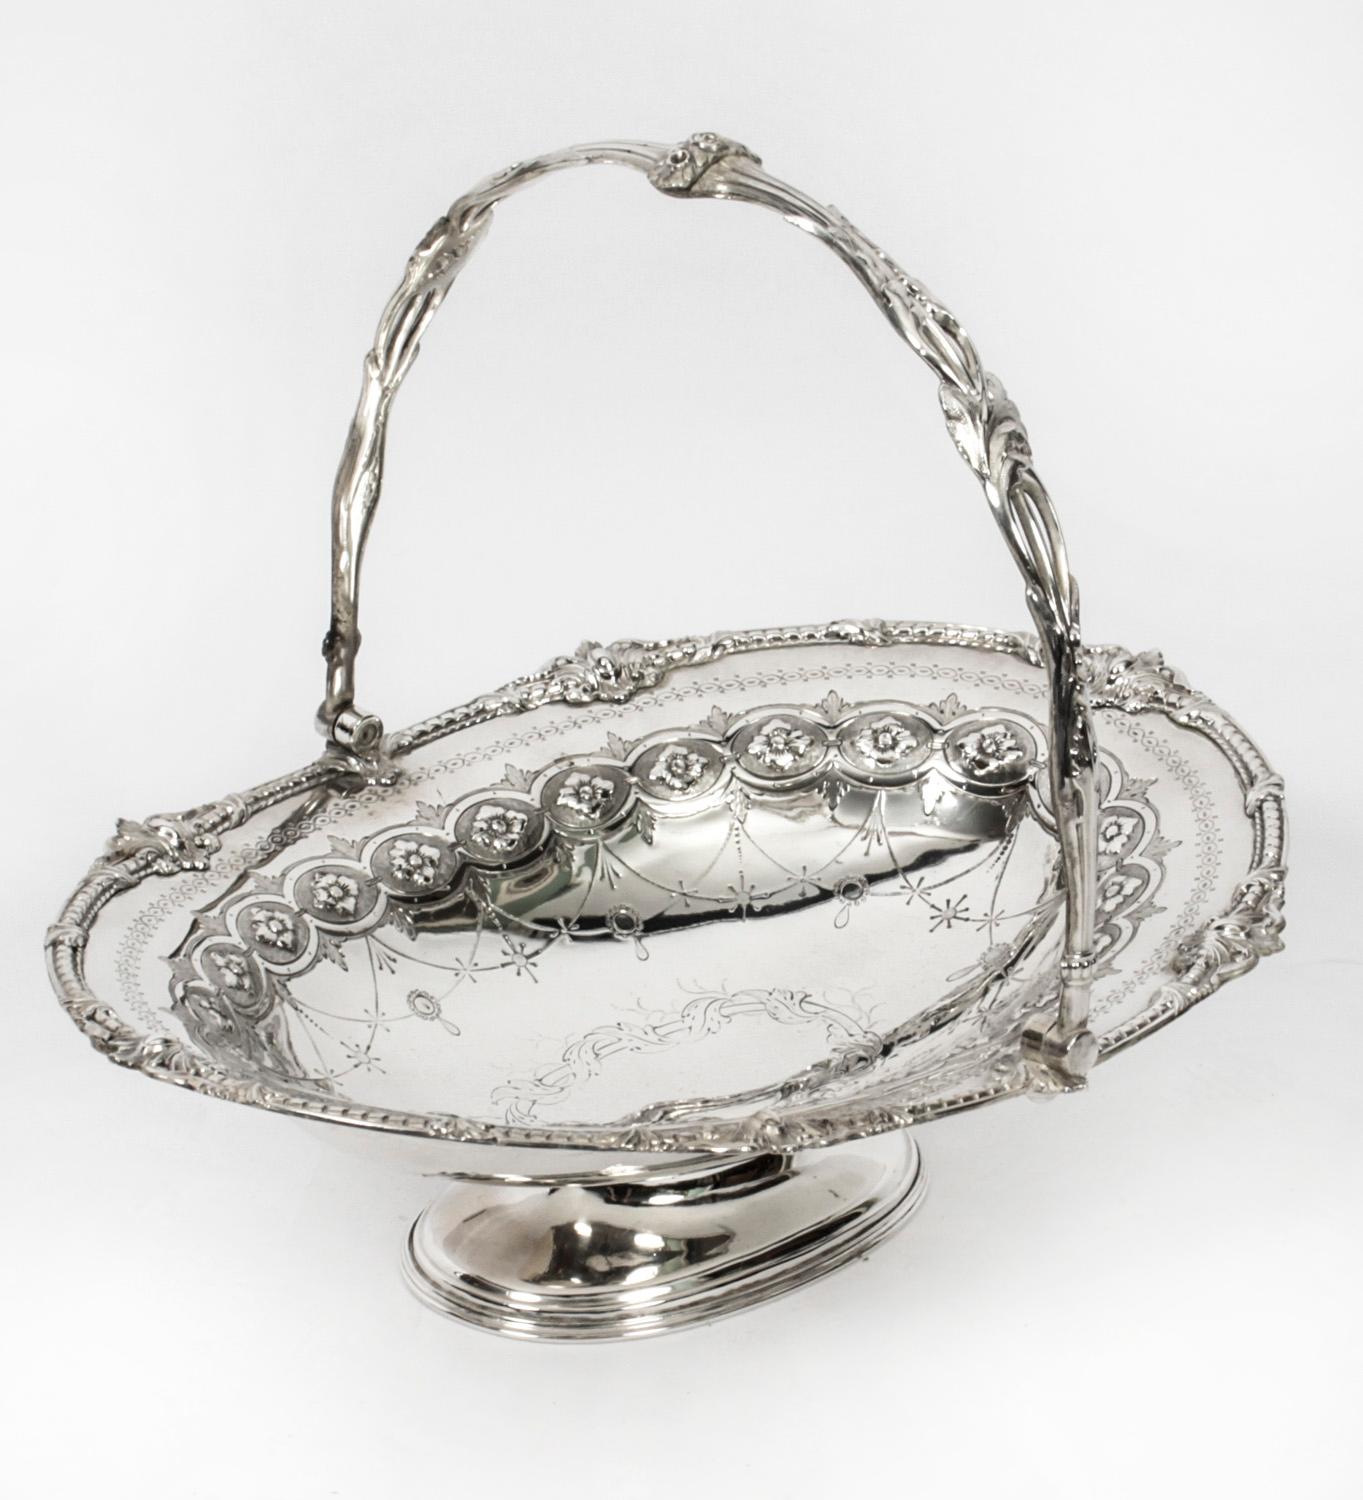 This is a stunning English Victorian silver plated fruit or bread basket by Henry Atkins & Co , circa 1880 in date.

The oval shaped body features a beaded boarder with fabulous engraved and embossed foliate and floral and decoration.
 
Add an